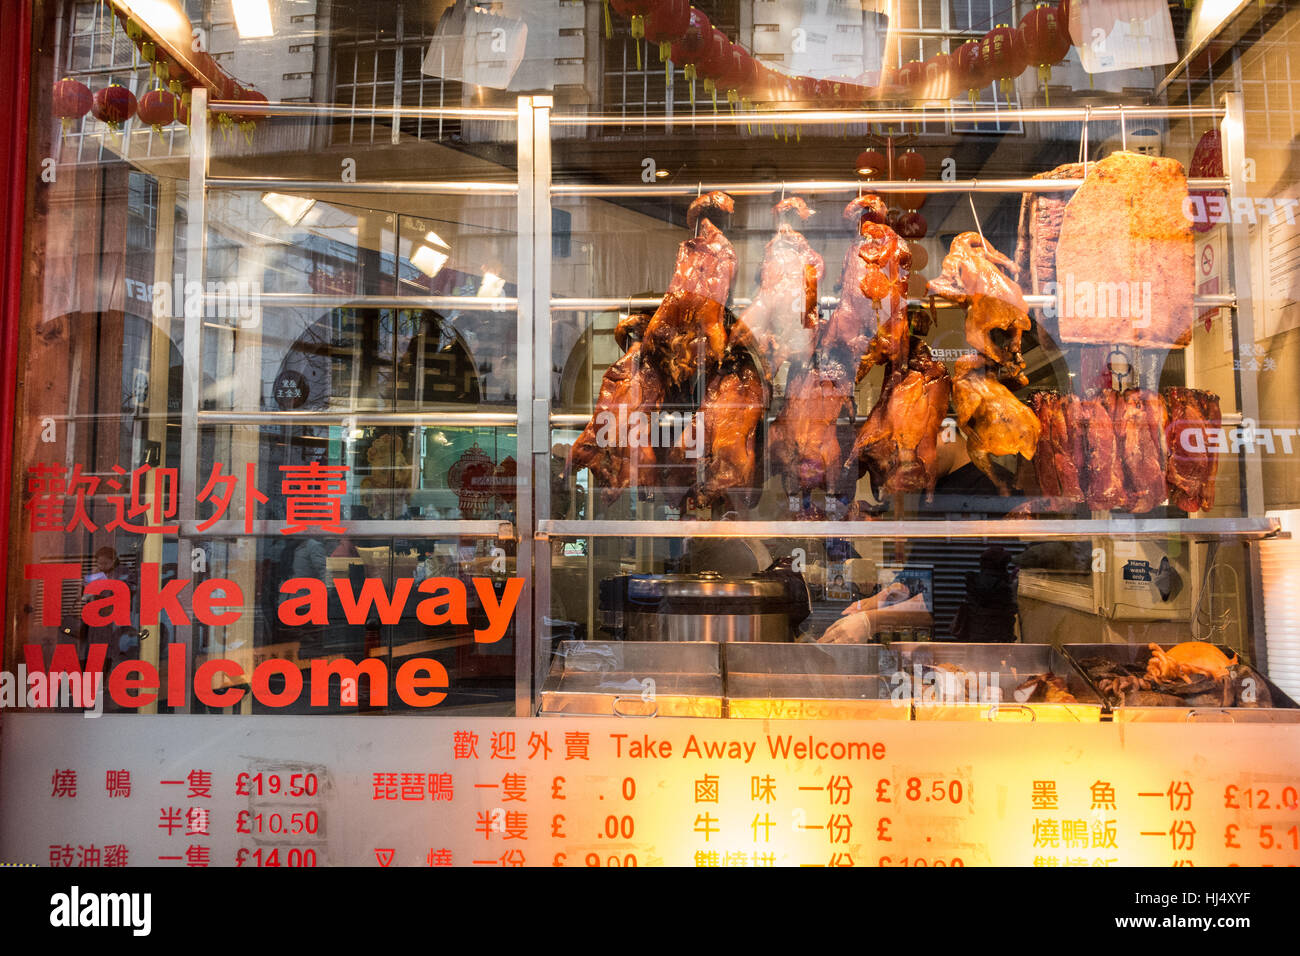 A takeaway restaurant in Chinatown, London, UK Stock Photo